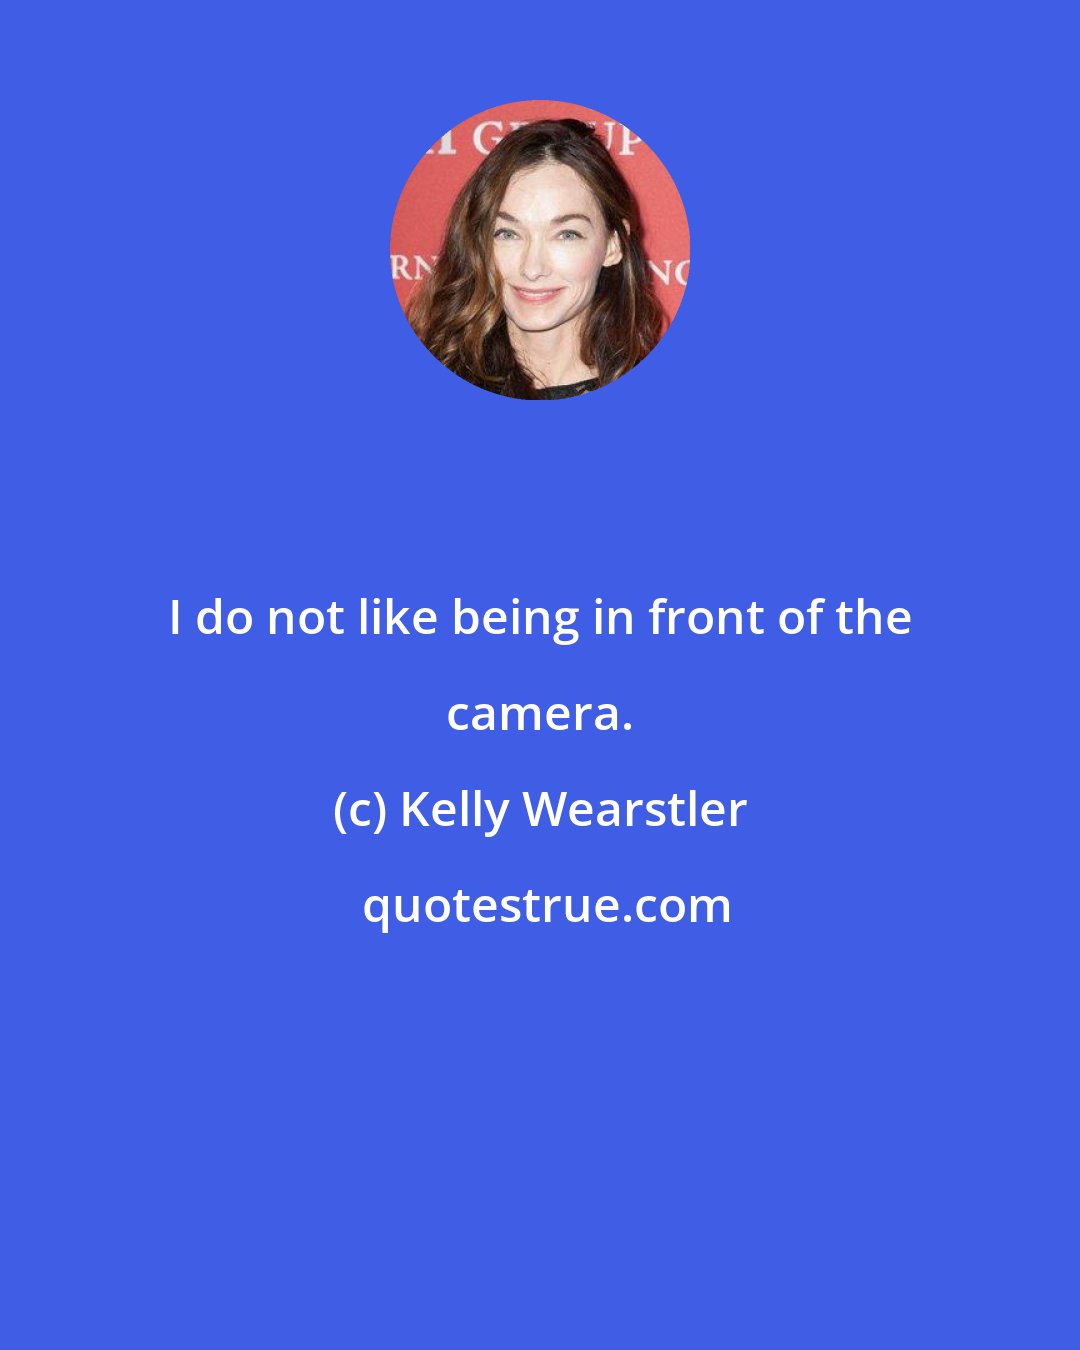 Kelly Wearstler: I do not like being in front of the camera.